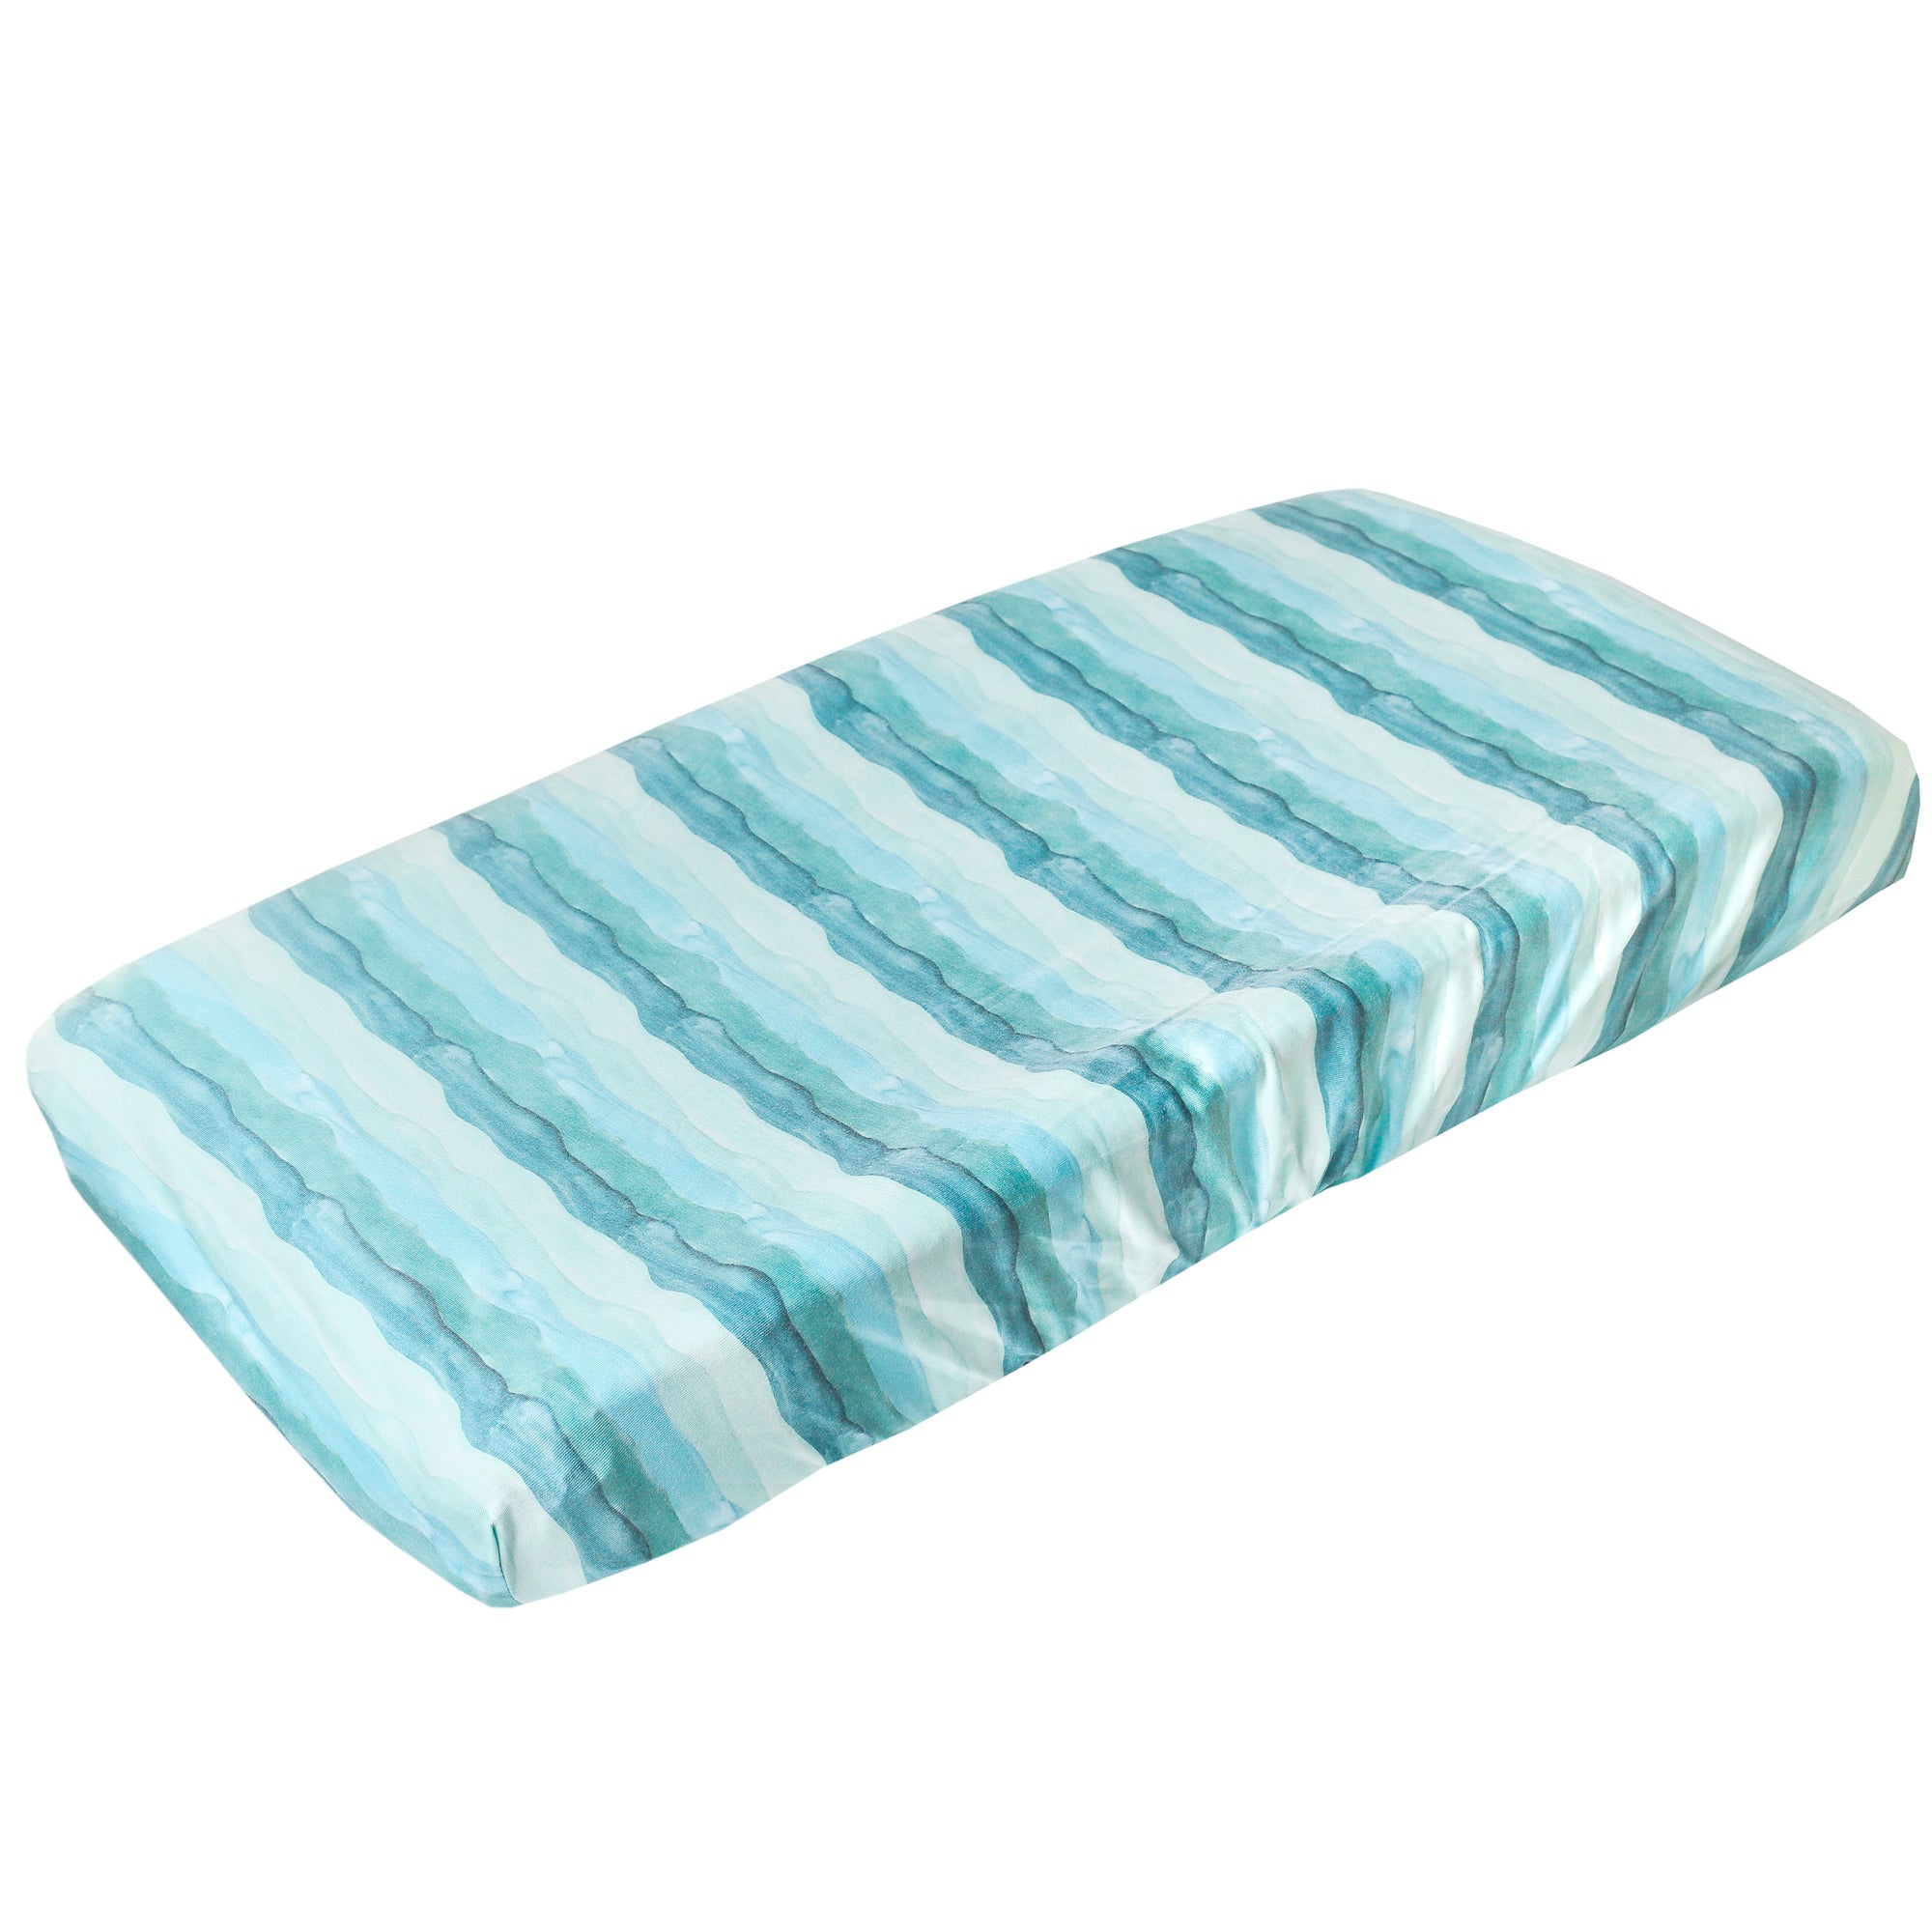 Premium Knit Diaper Changing Pad Cover - Waves